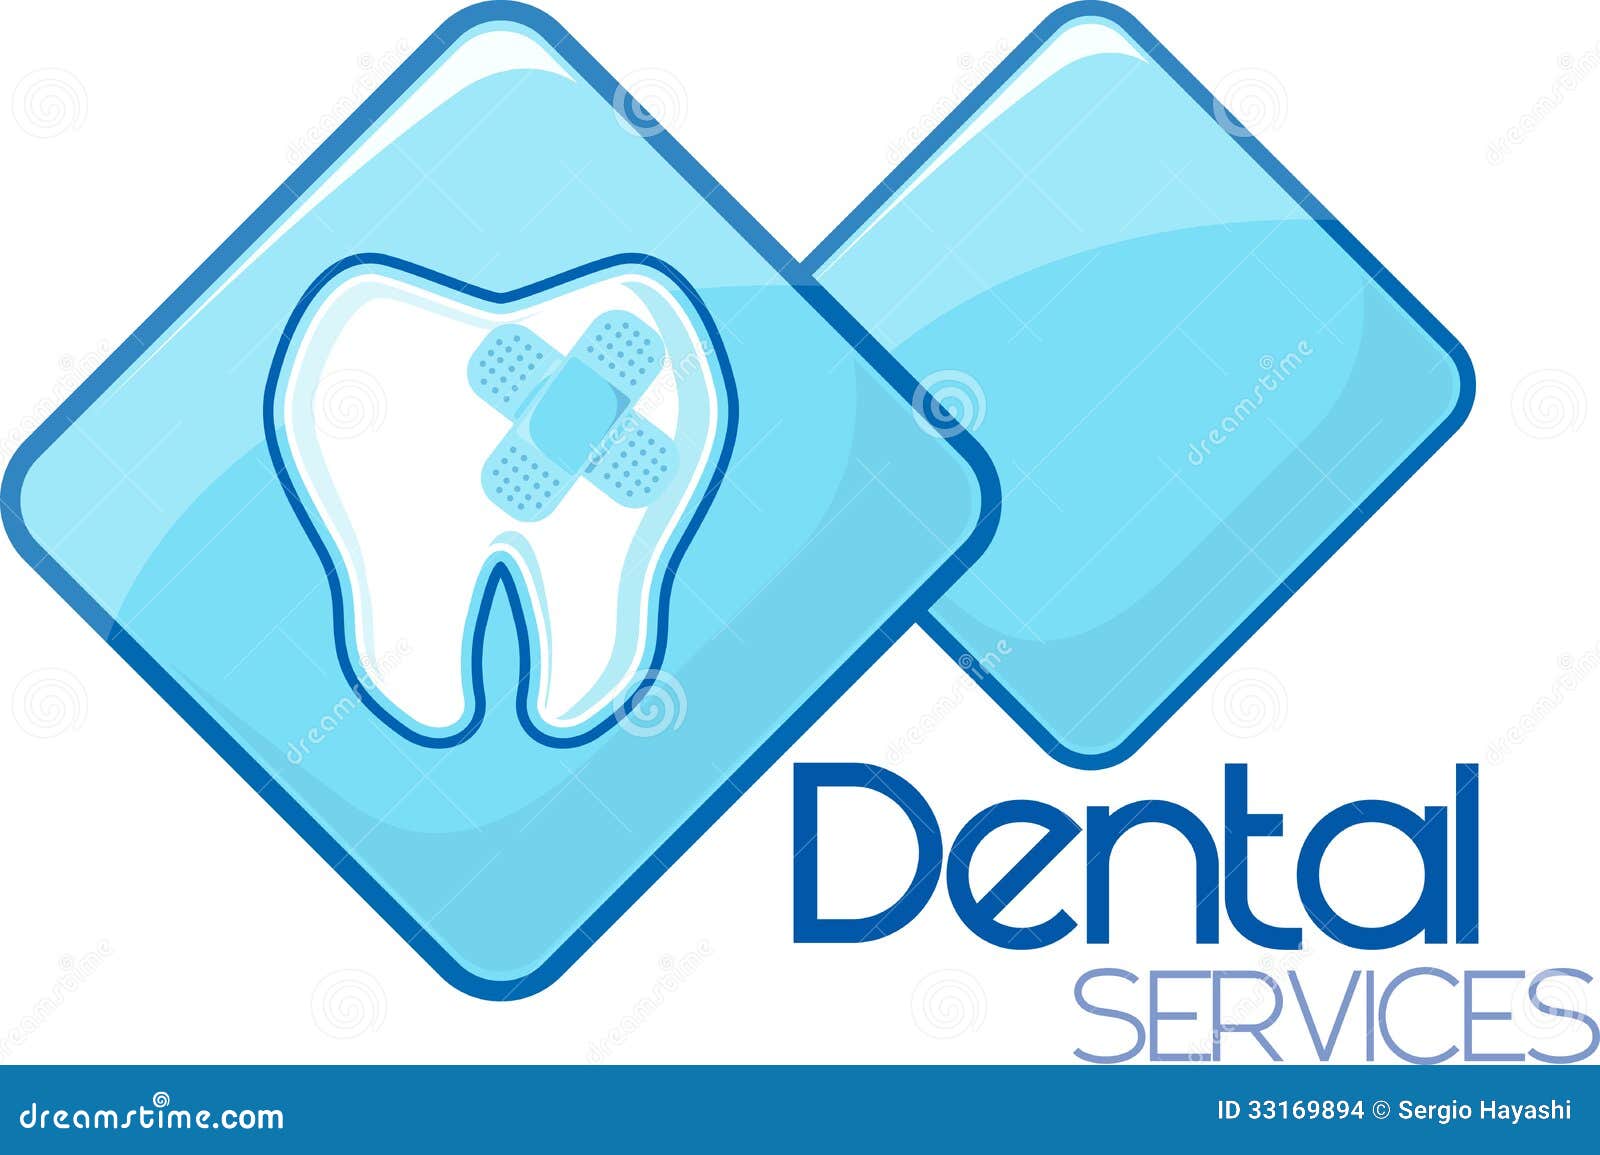 dental curing services 